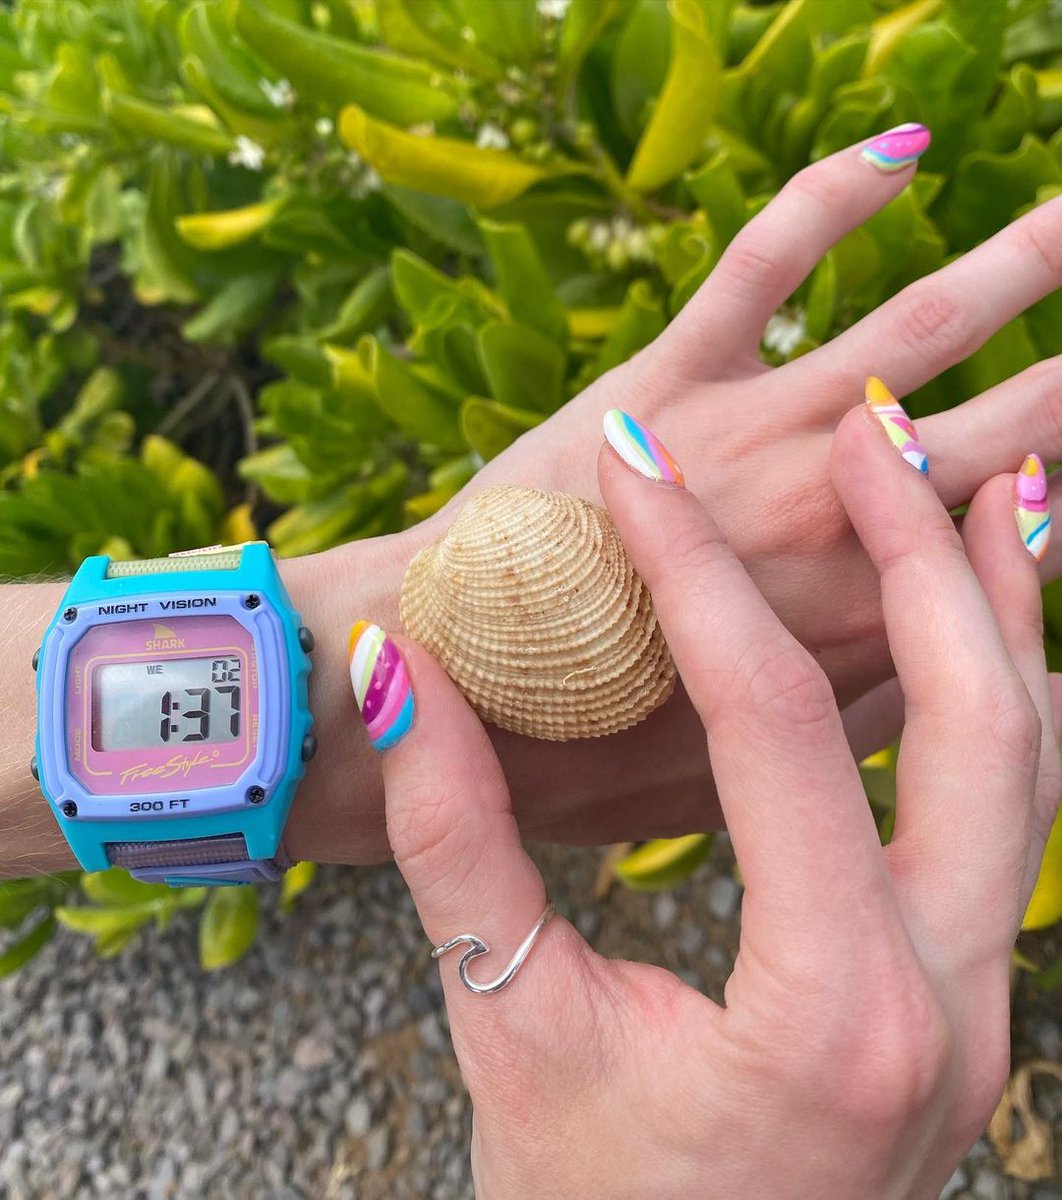 Shell hunting with a splash of Freestyle Watches #sharkwatch Lavender Tea 🌊🐚  

📷: @merrggie
_
#myfreestylewatch #watchlove #whiteaccessories #springstyle #watchshot #watchpics   freestyleusa.com/products/shark…